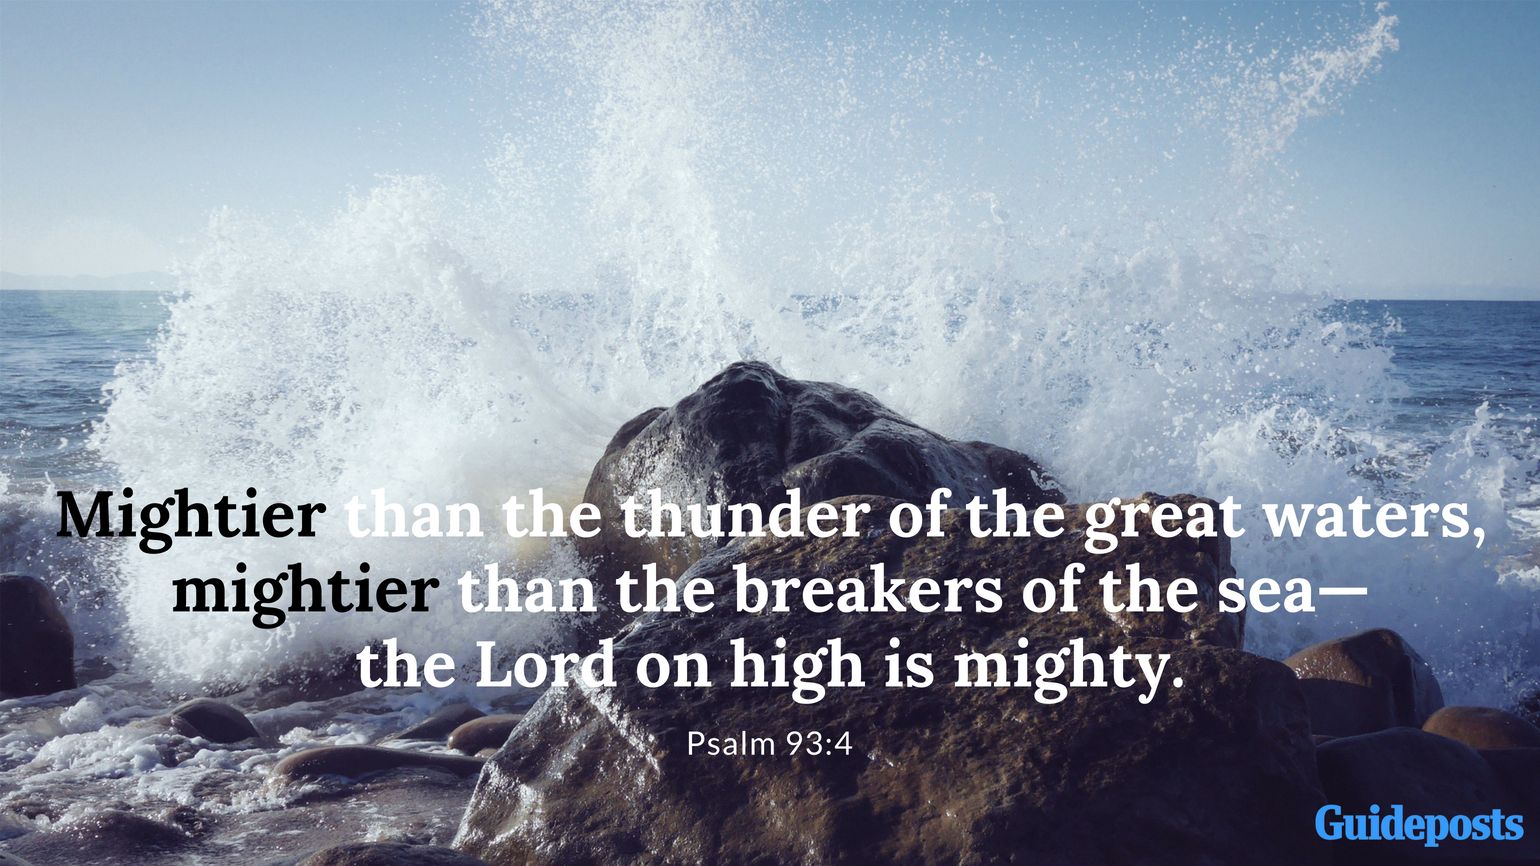 Mightier than the thunder of the great waters, mightier than the breakers of the sea—the Lord on high is mighty. Psalm 93:4